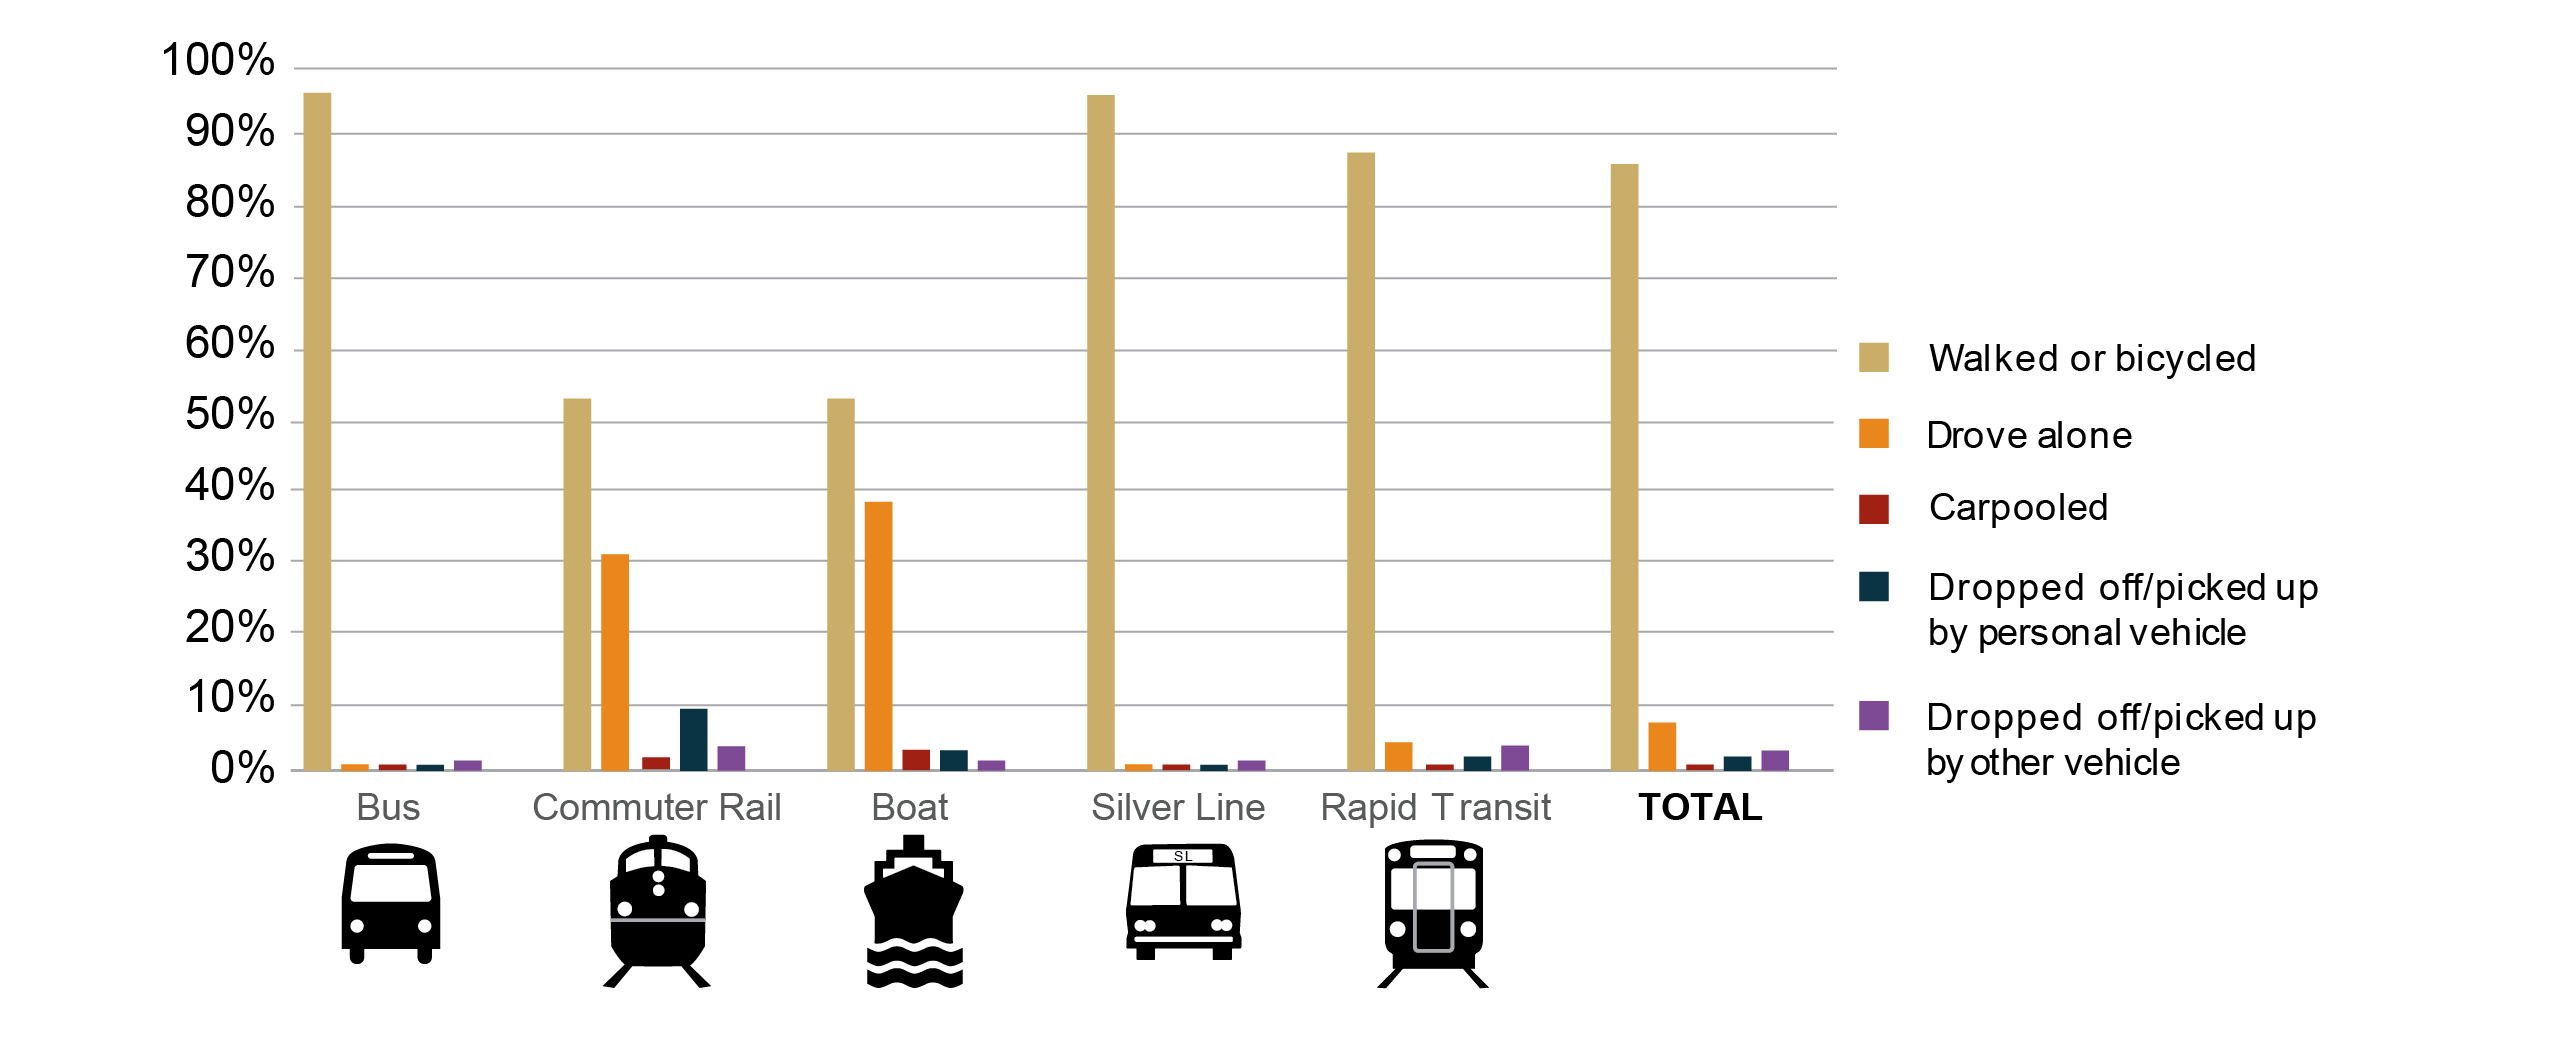 Figure 6 is a series of bar graphs showing the percentage distributions of means of initial access to or final egress from each MBTA service mode when used as the first or last link in an MBTA trip, as reported in the 2015-17 survey.